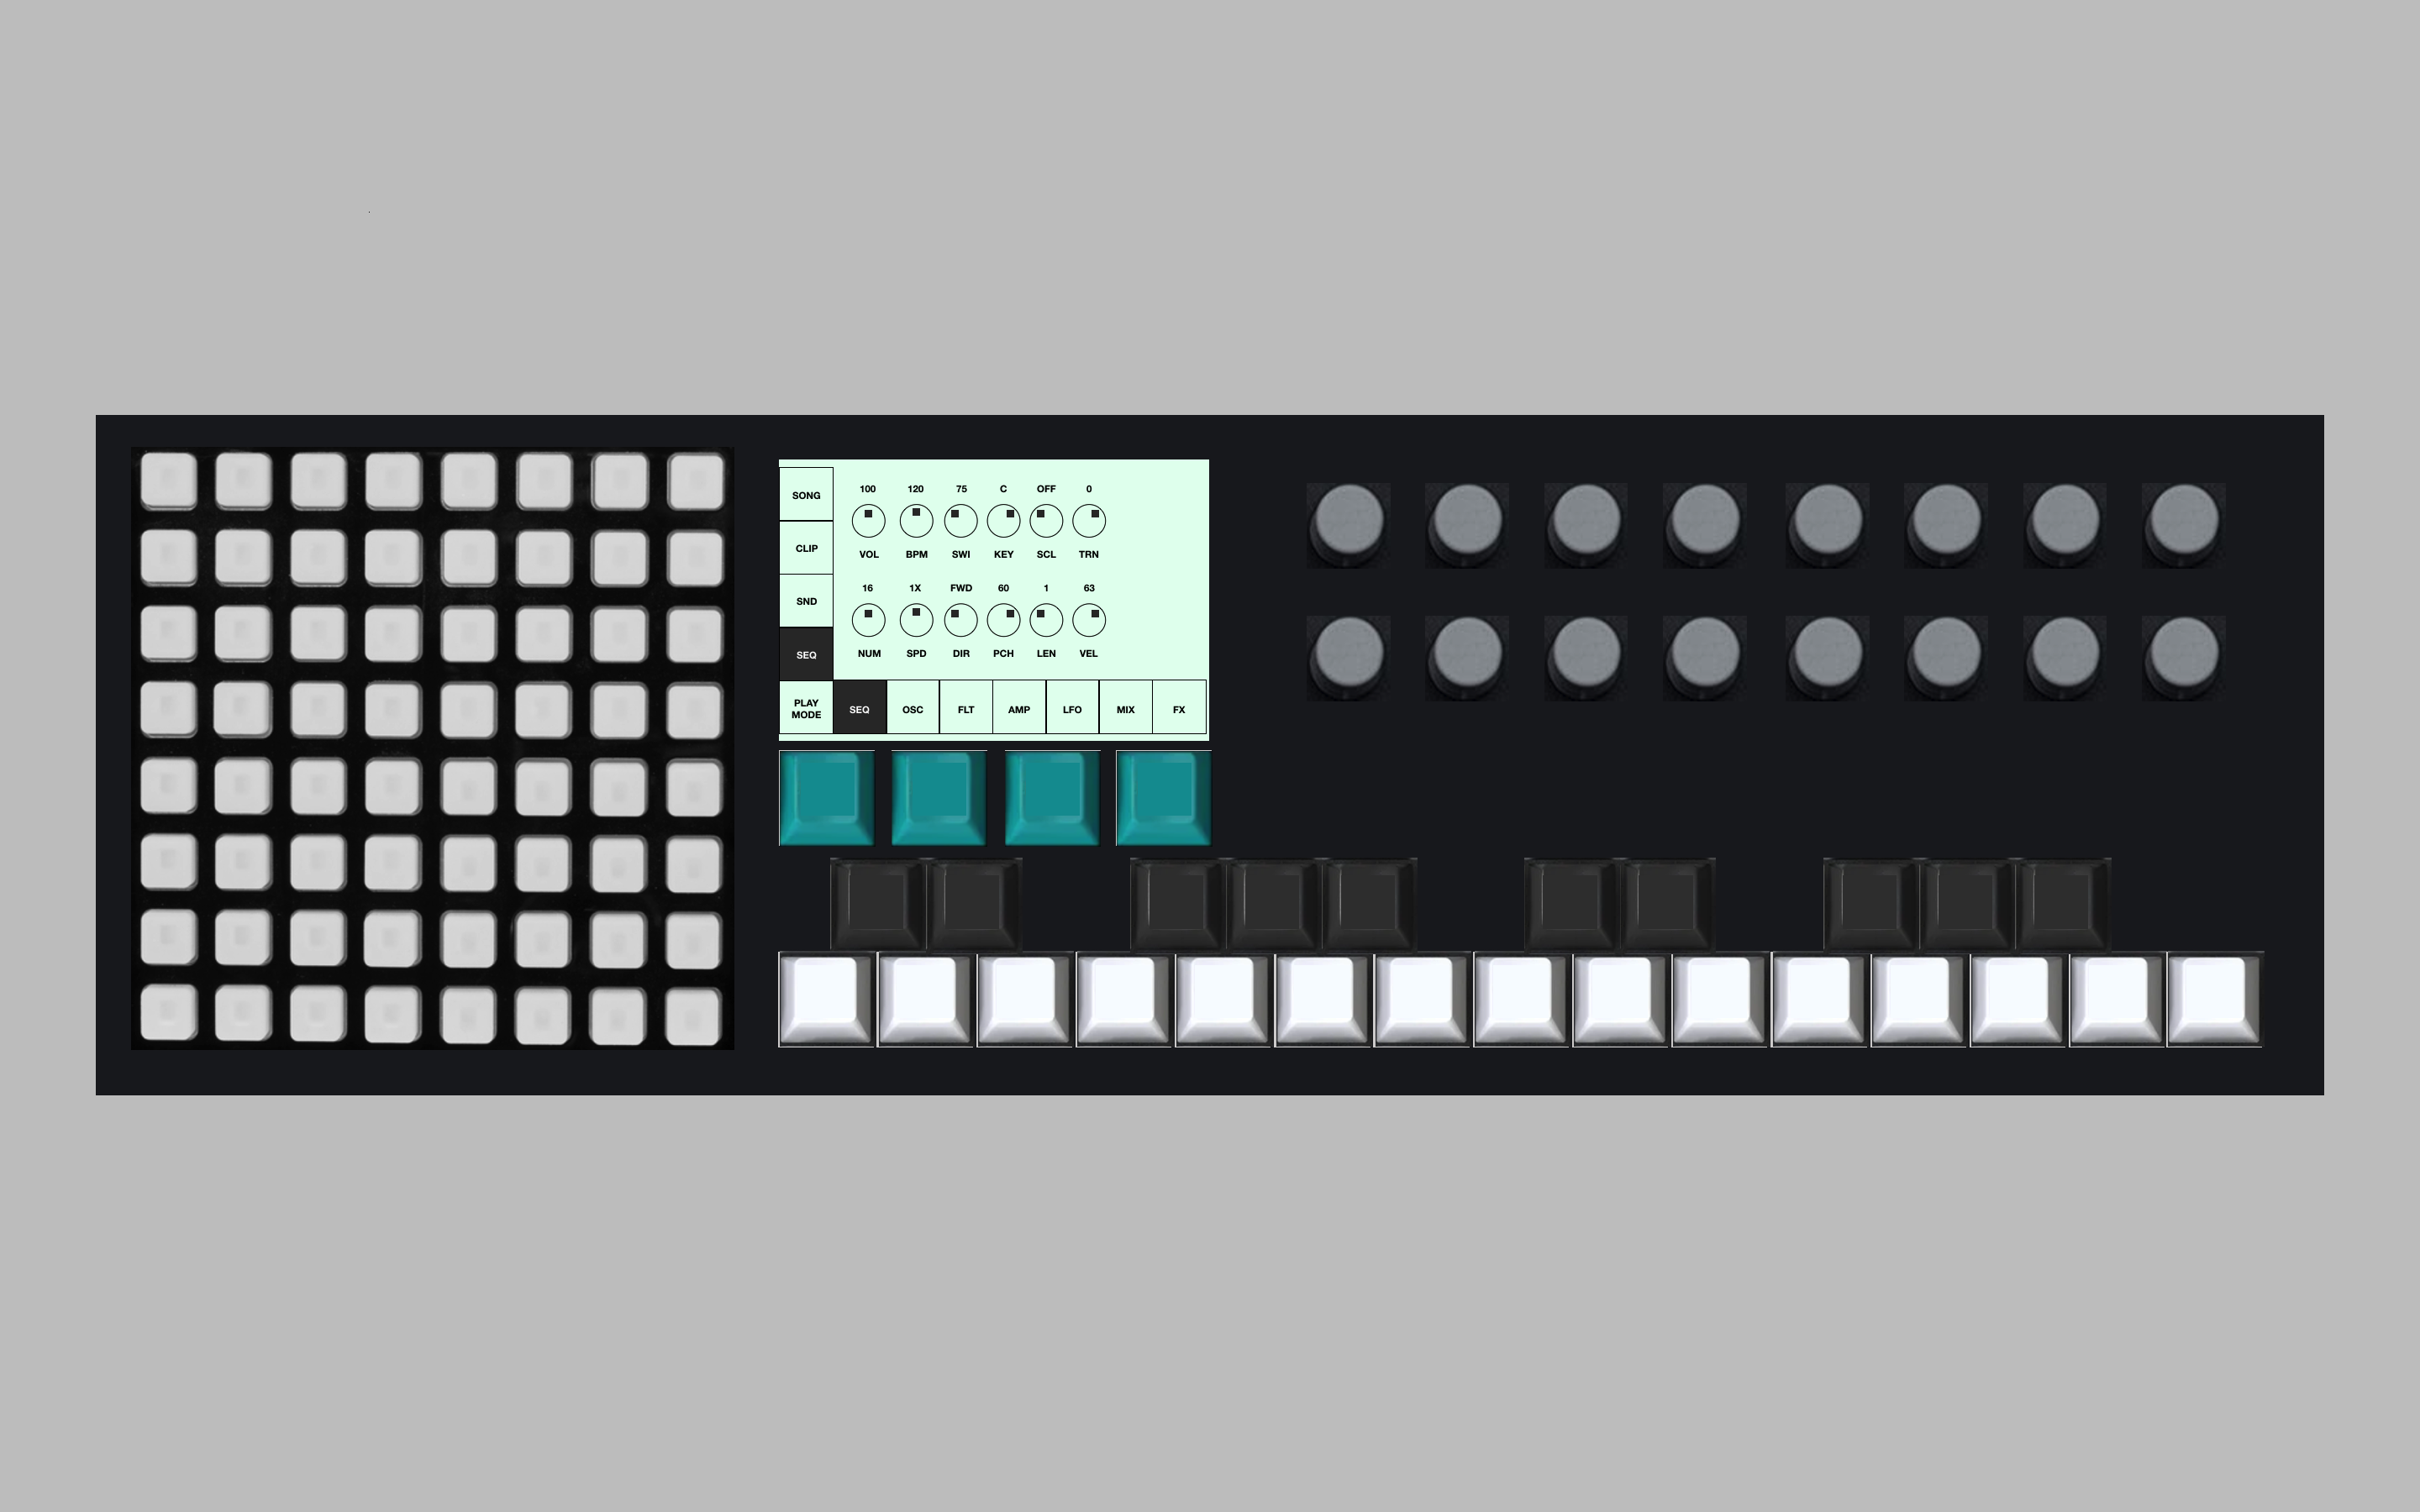 Beste, an intuitive hardware synthesizer and music sequencer for live electronic music performance.